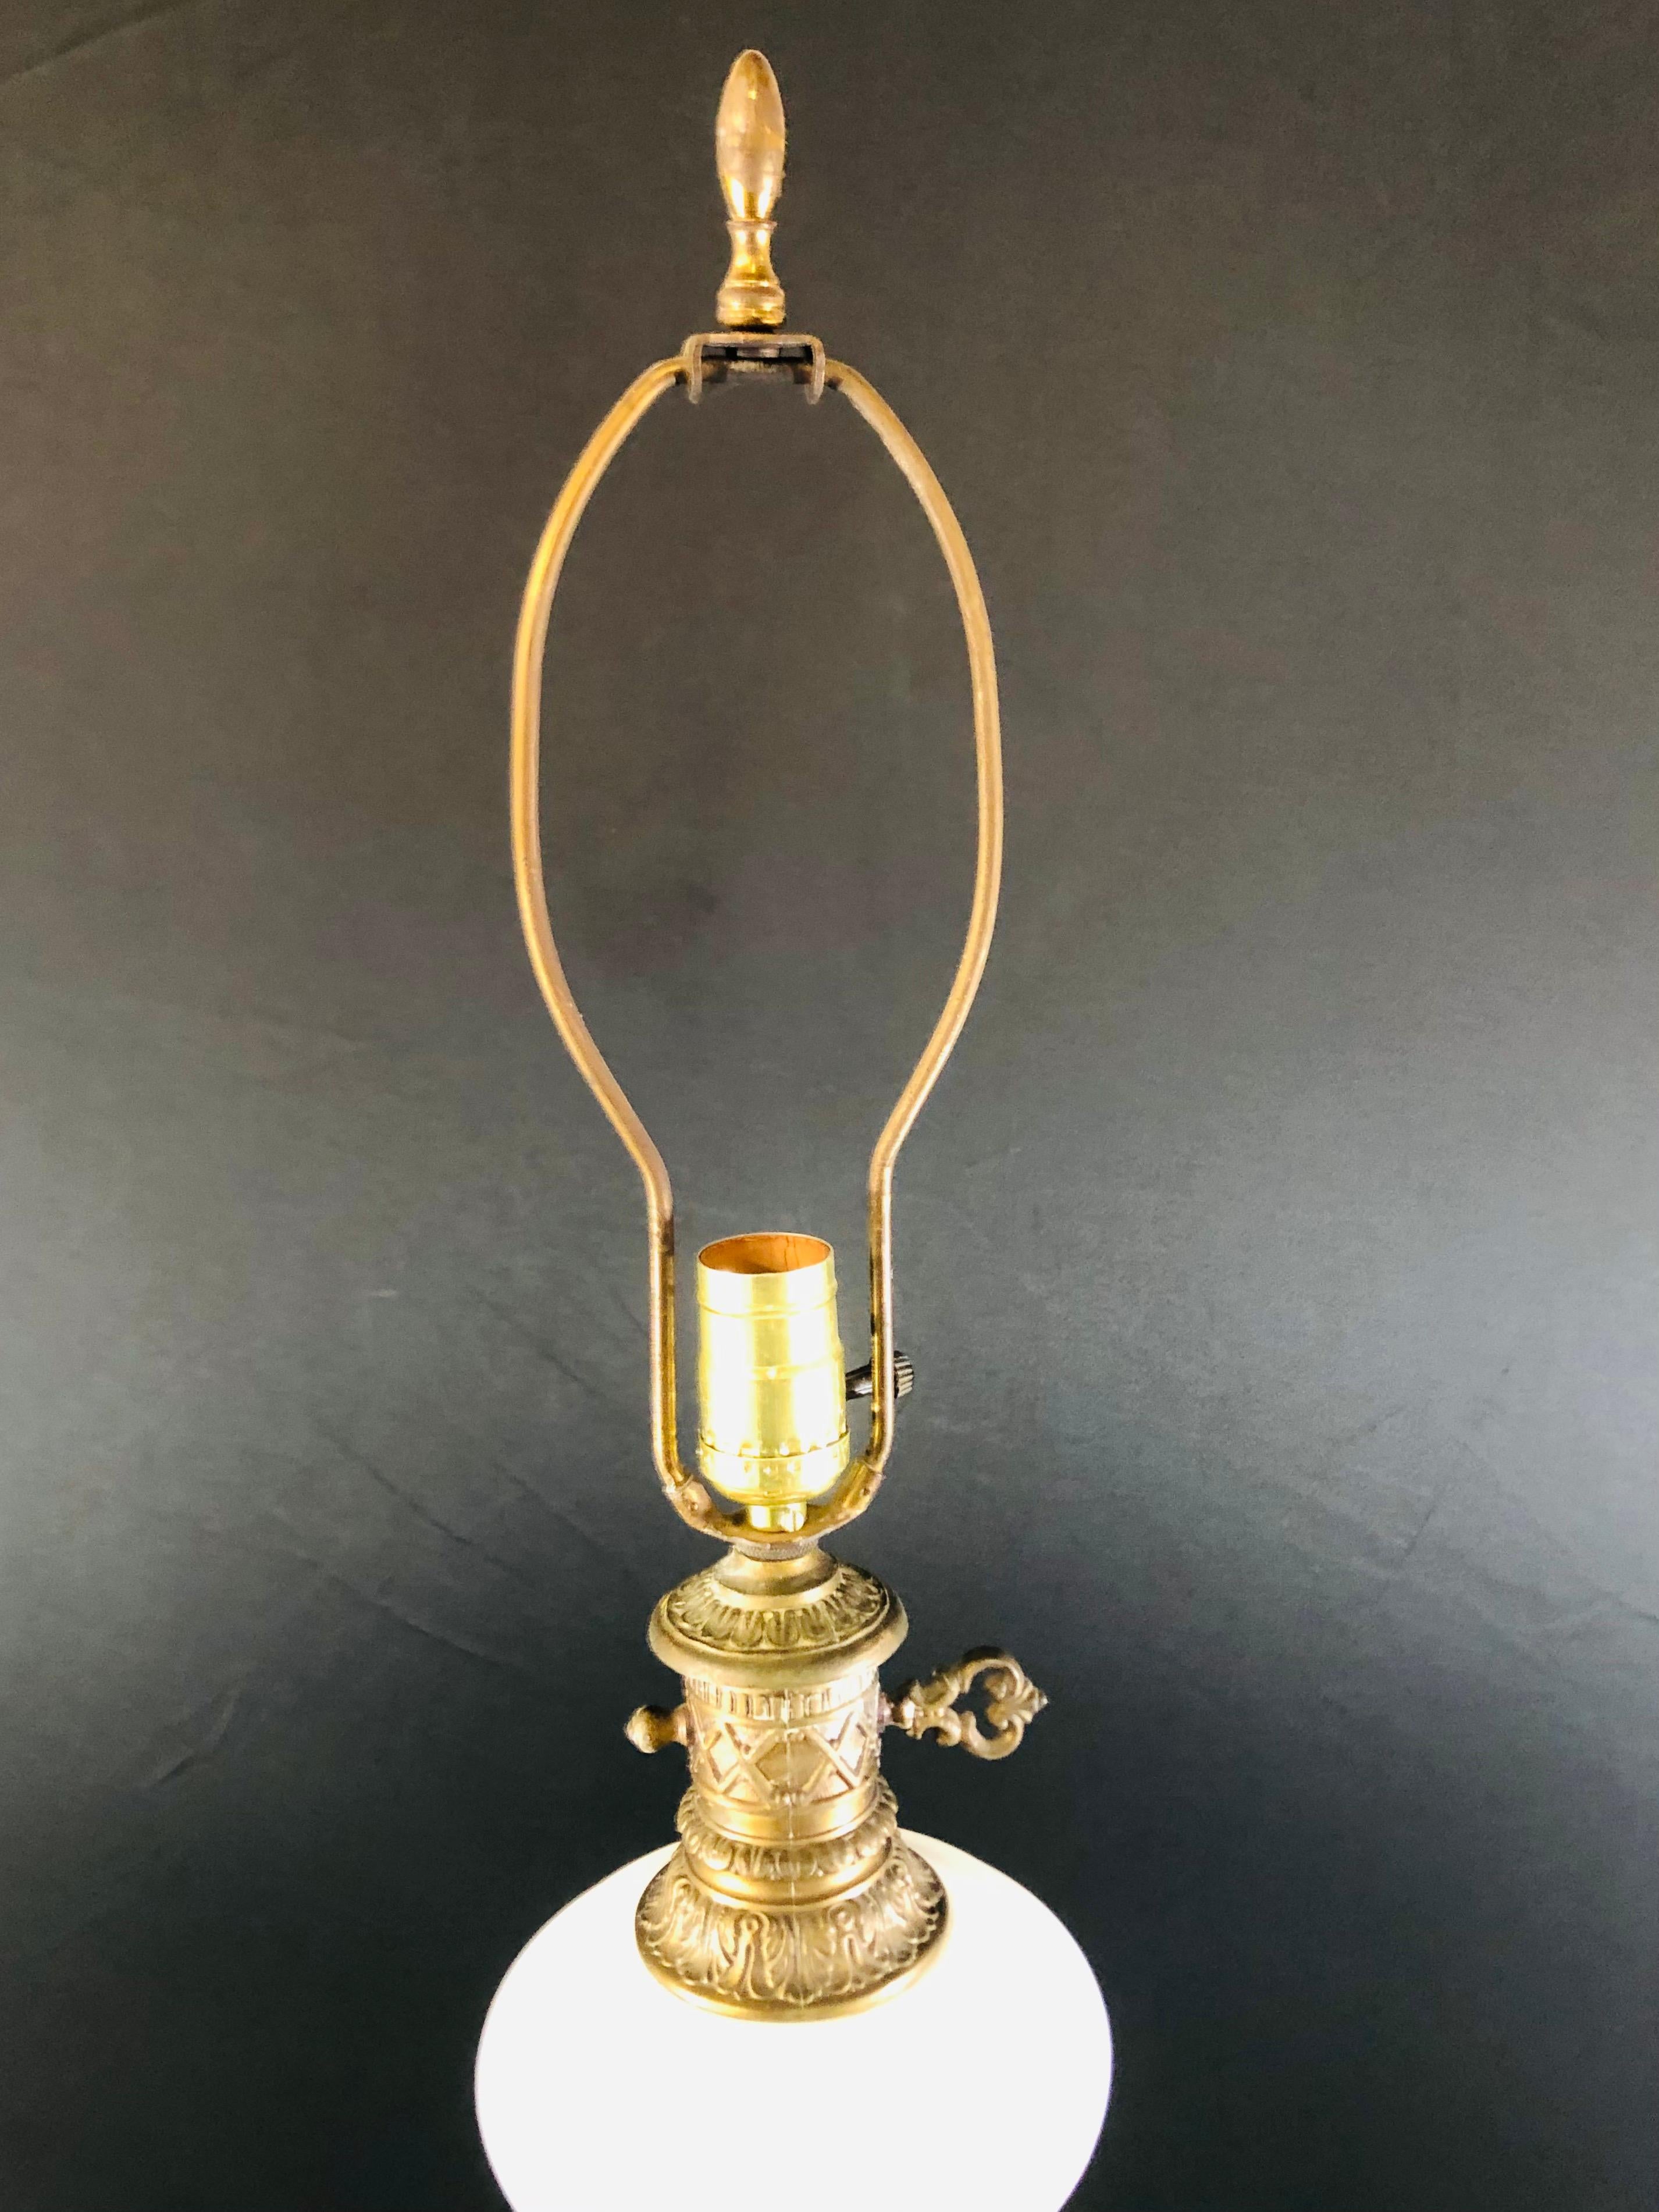 An antique French Louis XVI style table lamp with white opaline glass and bronze inlay and base. The bronze base if finely carved in a triangle shape with three crowfeet and leaves design on top holding the white opaline glass lamp body. A charming